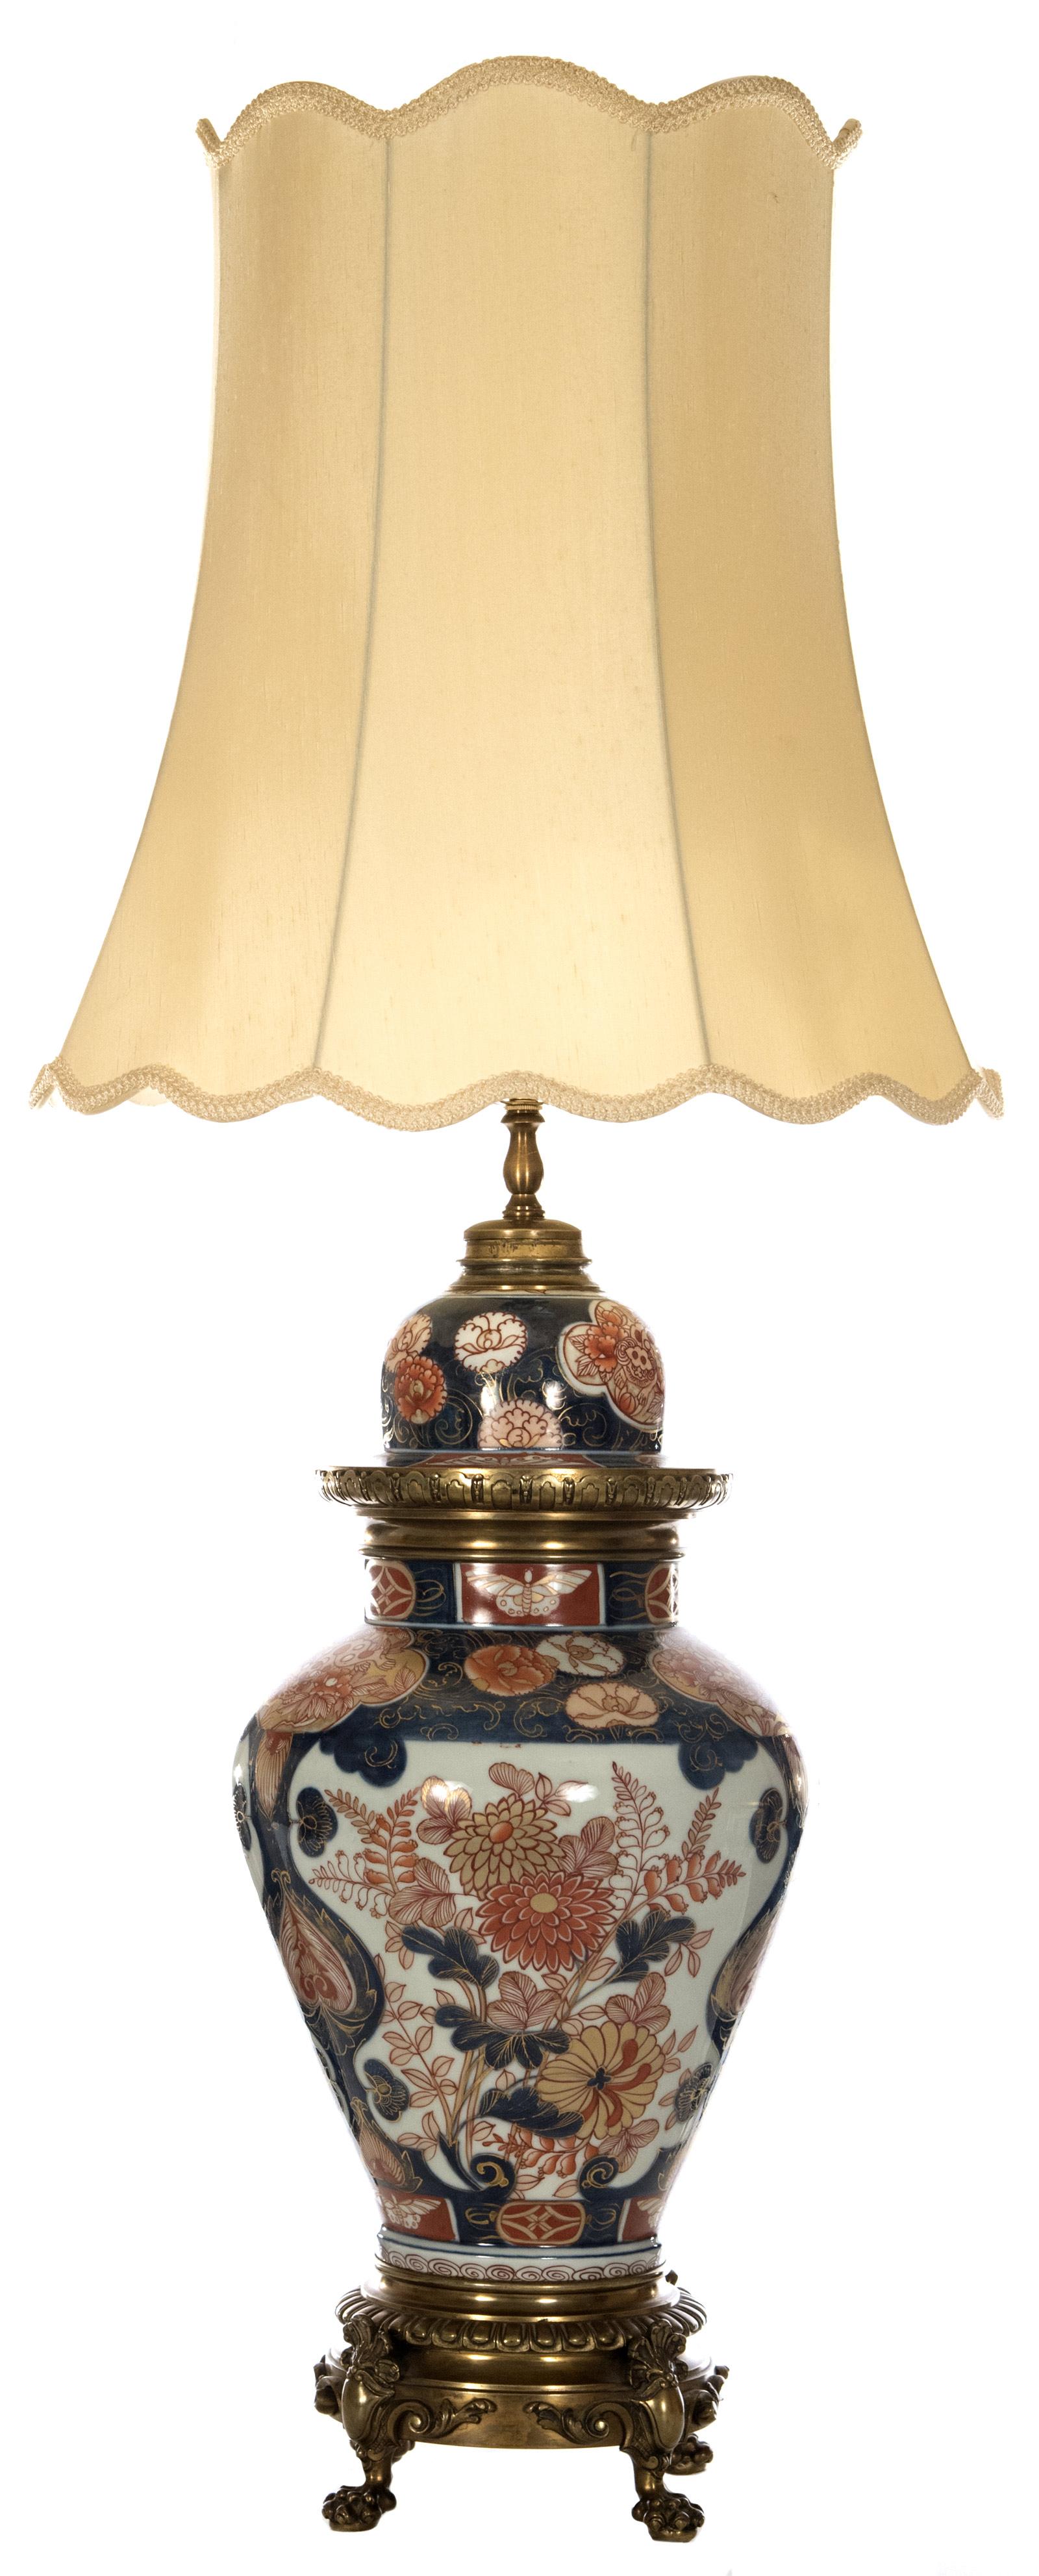 A 19th century Imari jar of baluster form on a paw-footed brass base fitted as a table lamp. The lid is decorated with a band of floral motifs and a band of alternating blue and red grounds, affixed to the body with a gadrooned brass ring. The body